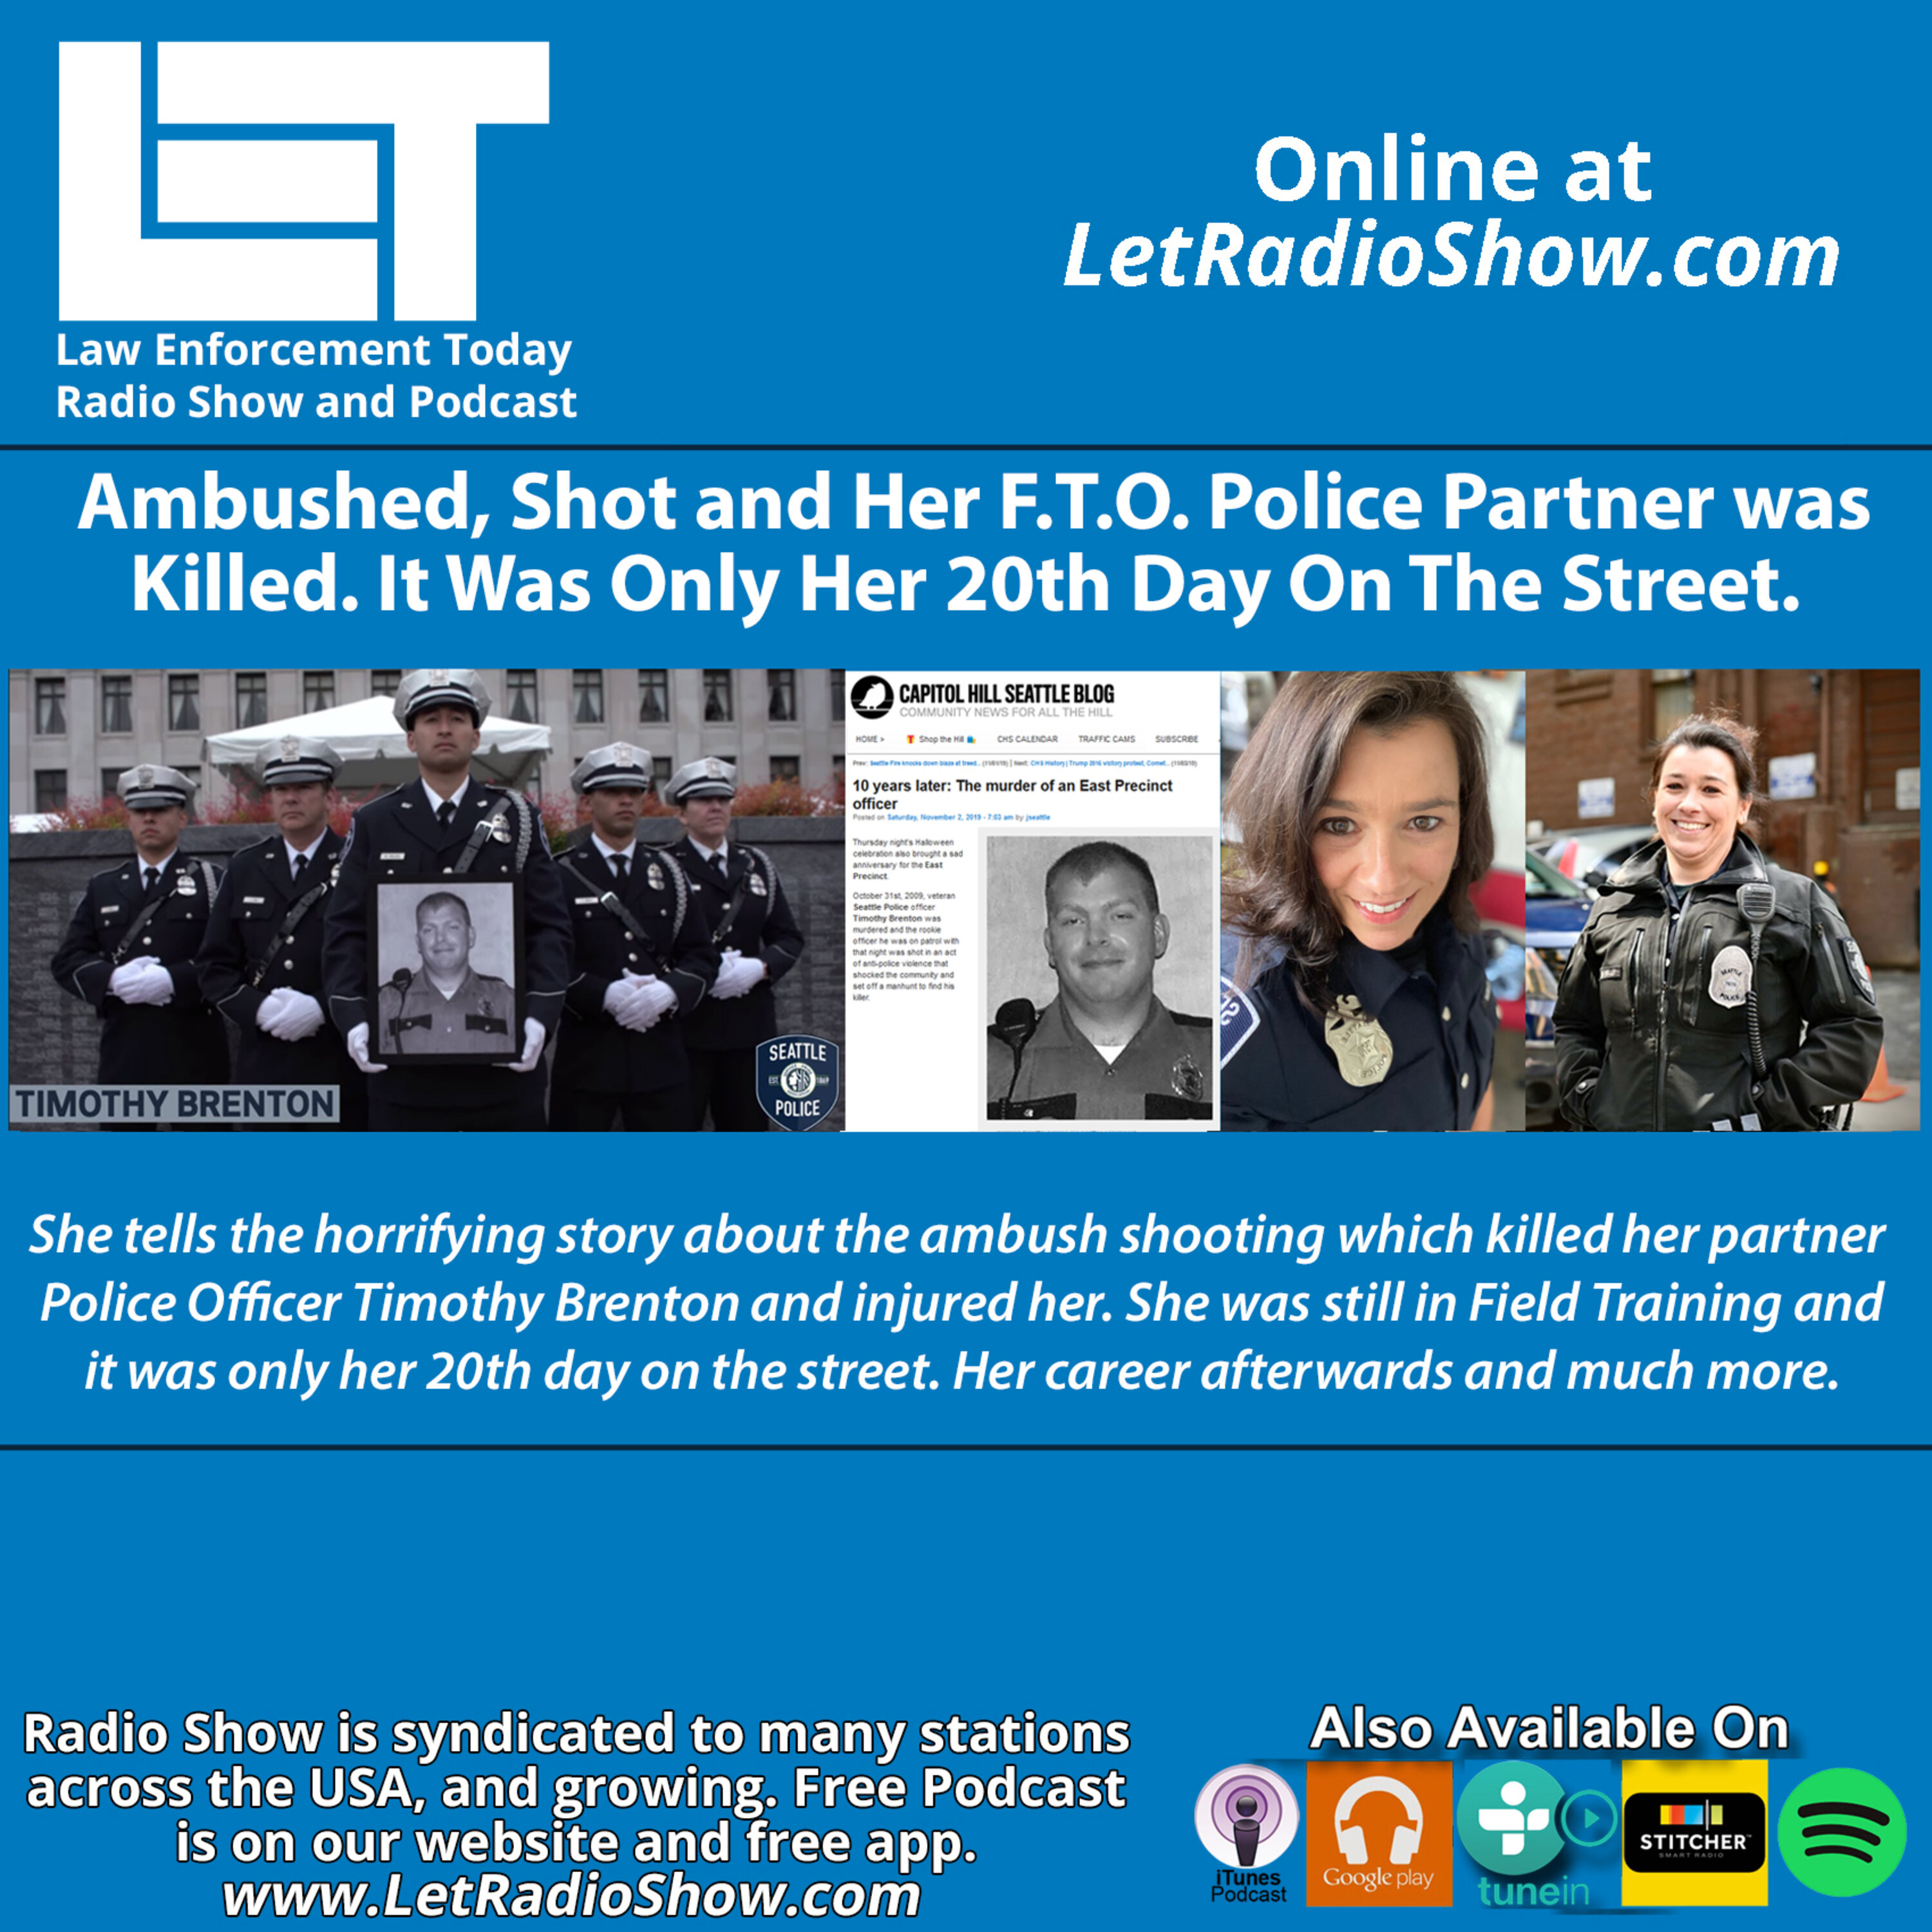 S7E3: Ambushed, Shot And Her Police Partner Was Killed. 20th Day On The Street. Image